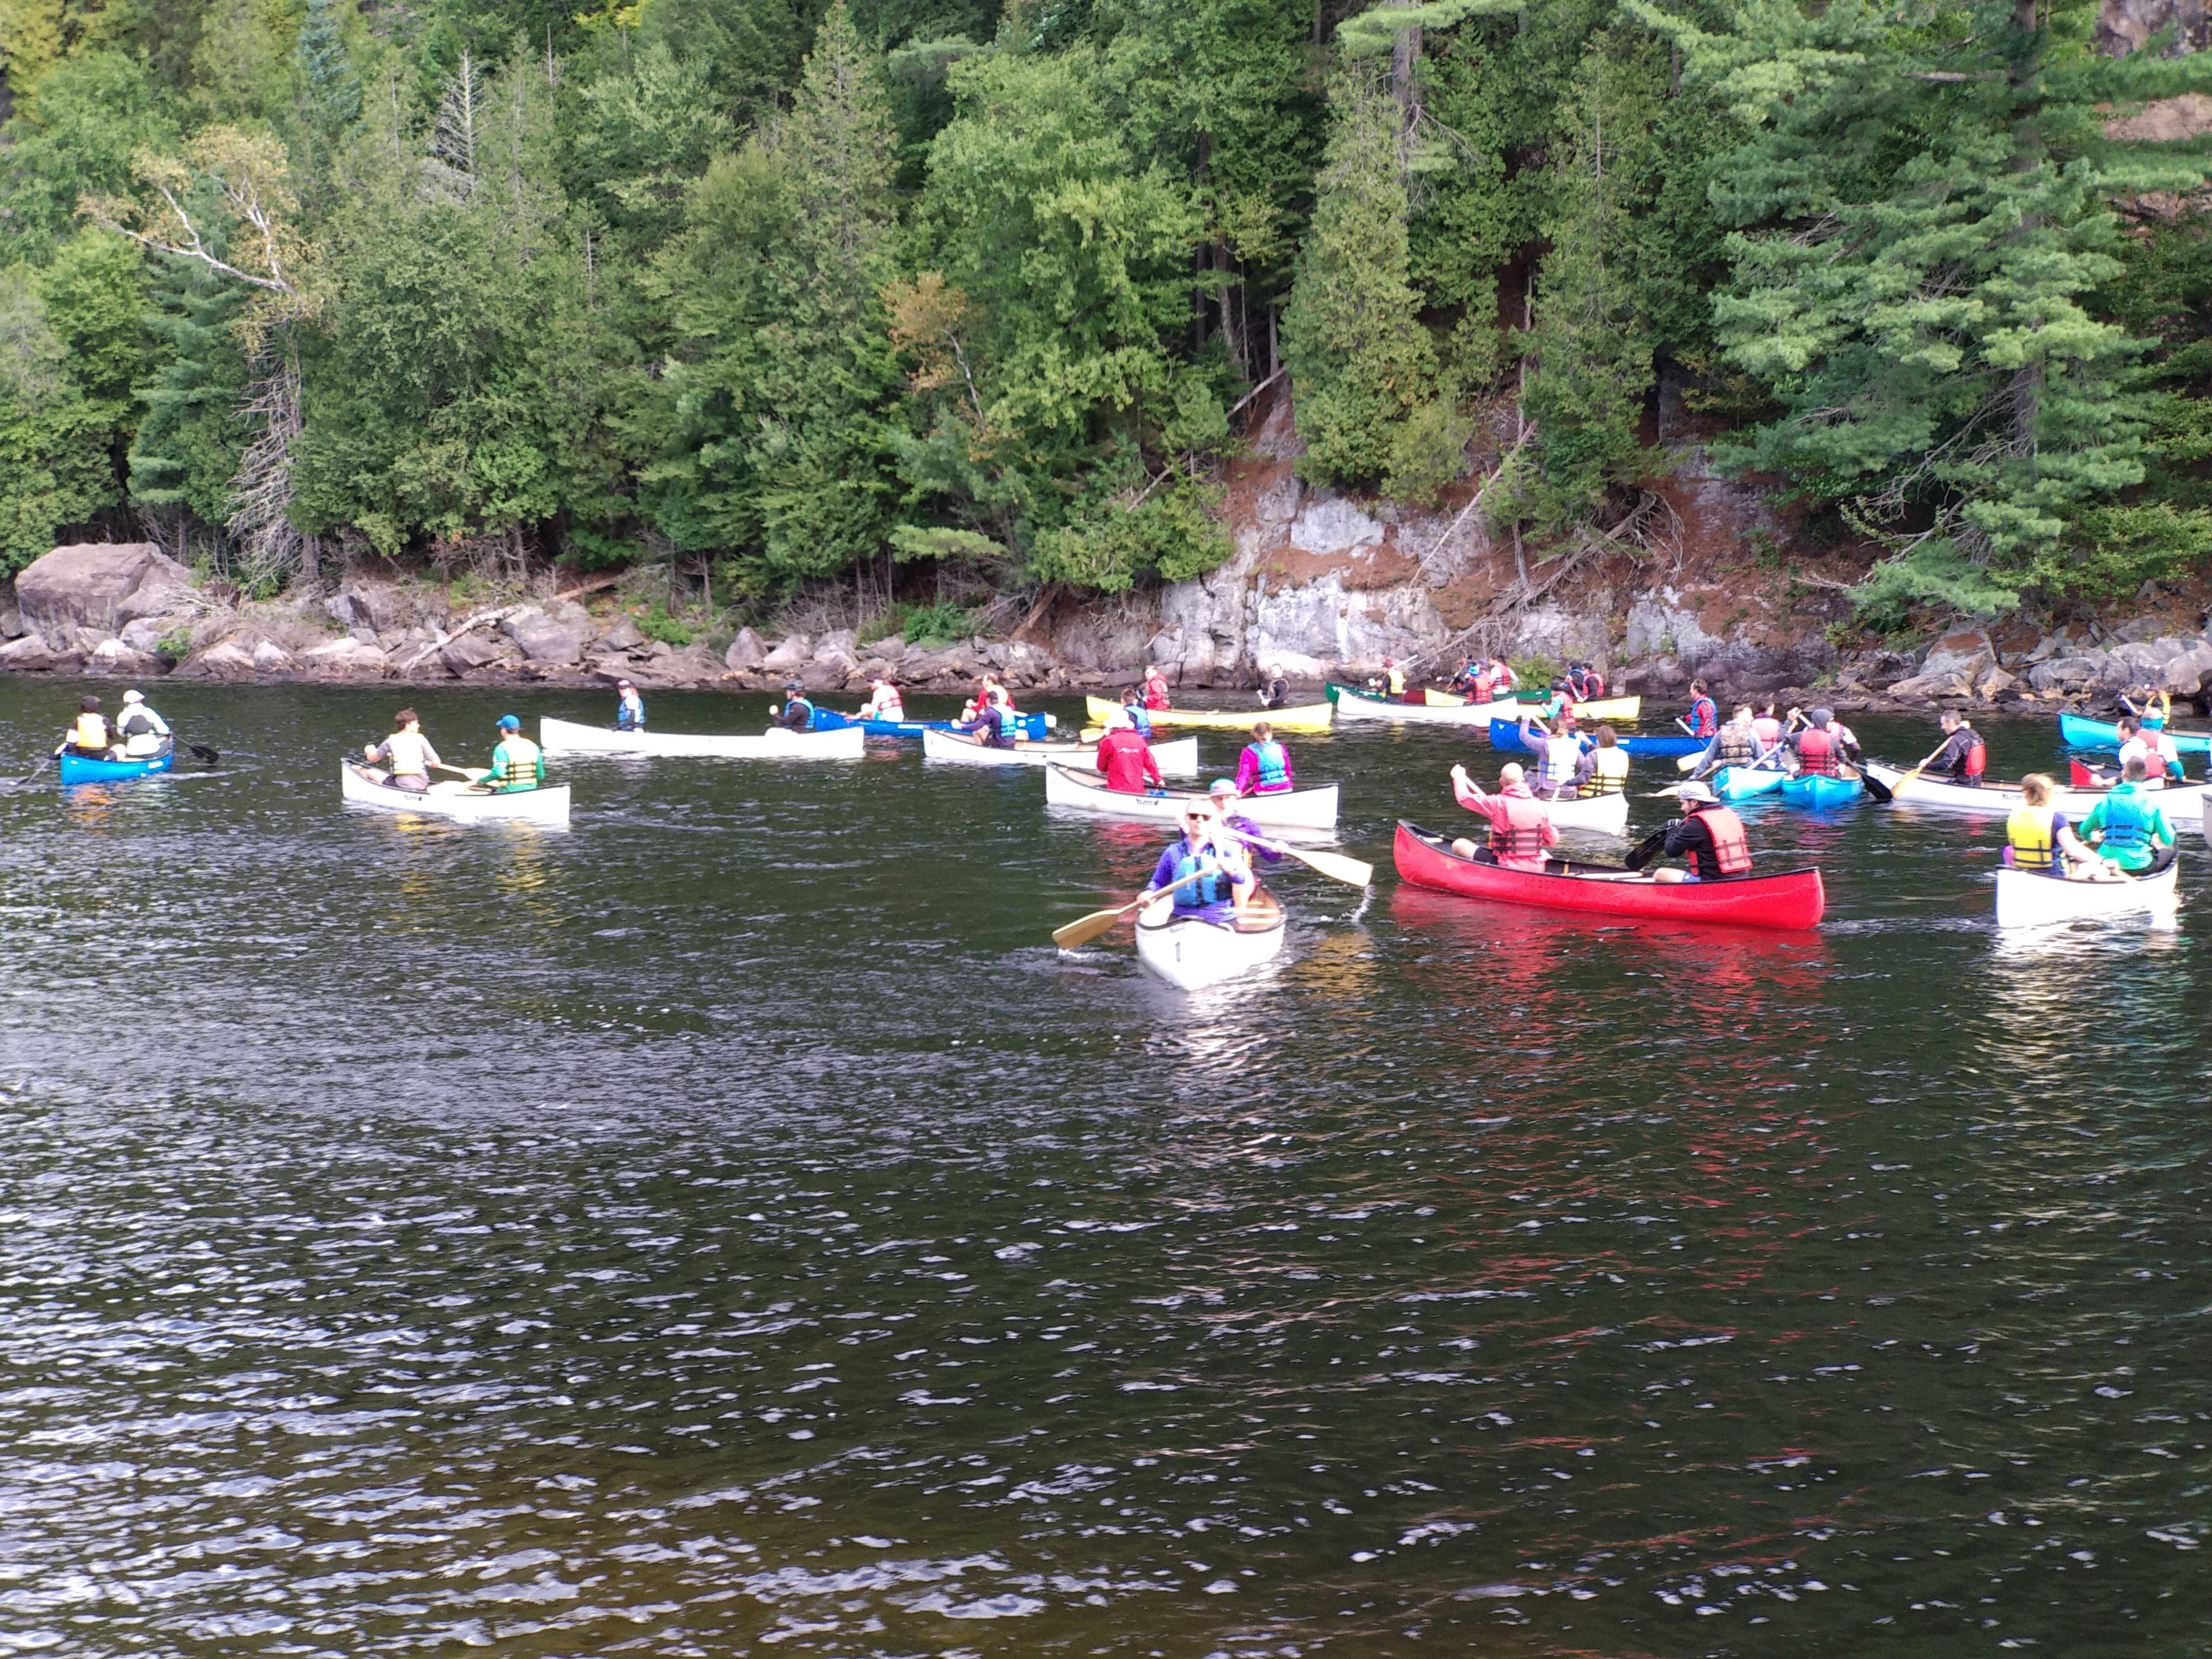 kayaks on river with several participants